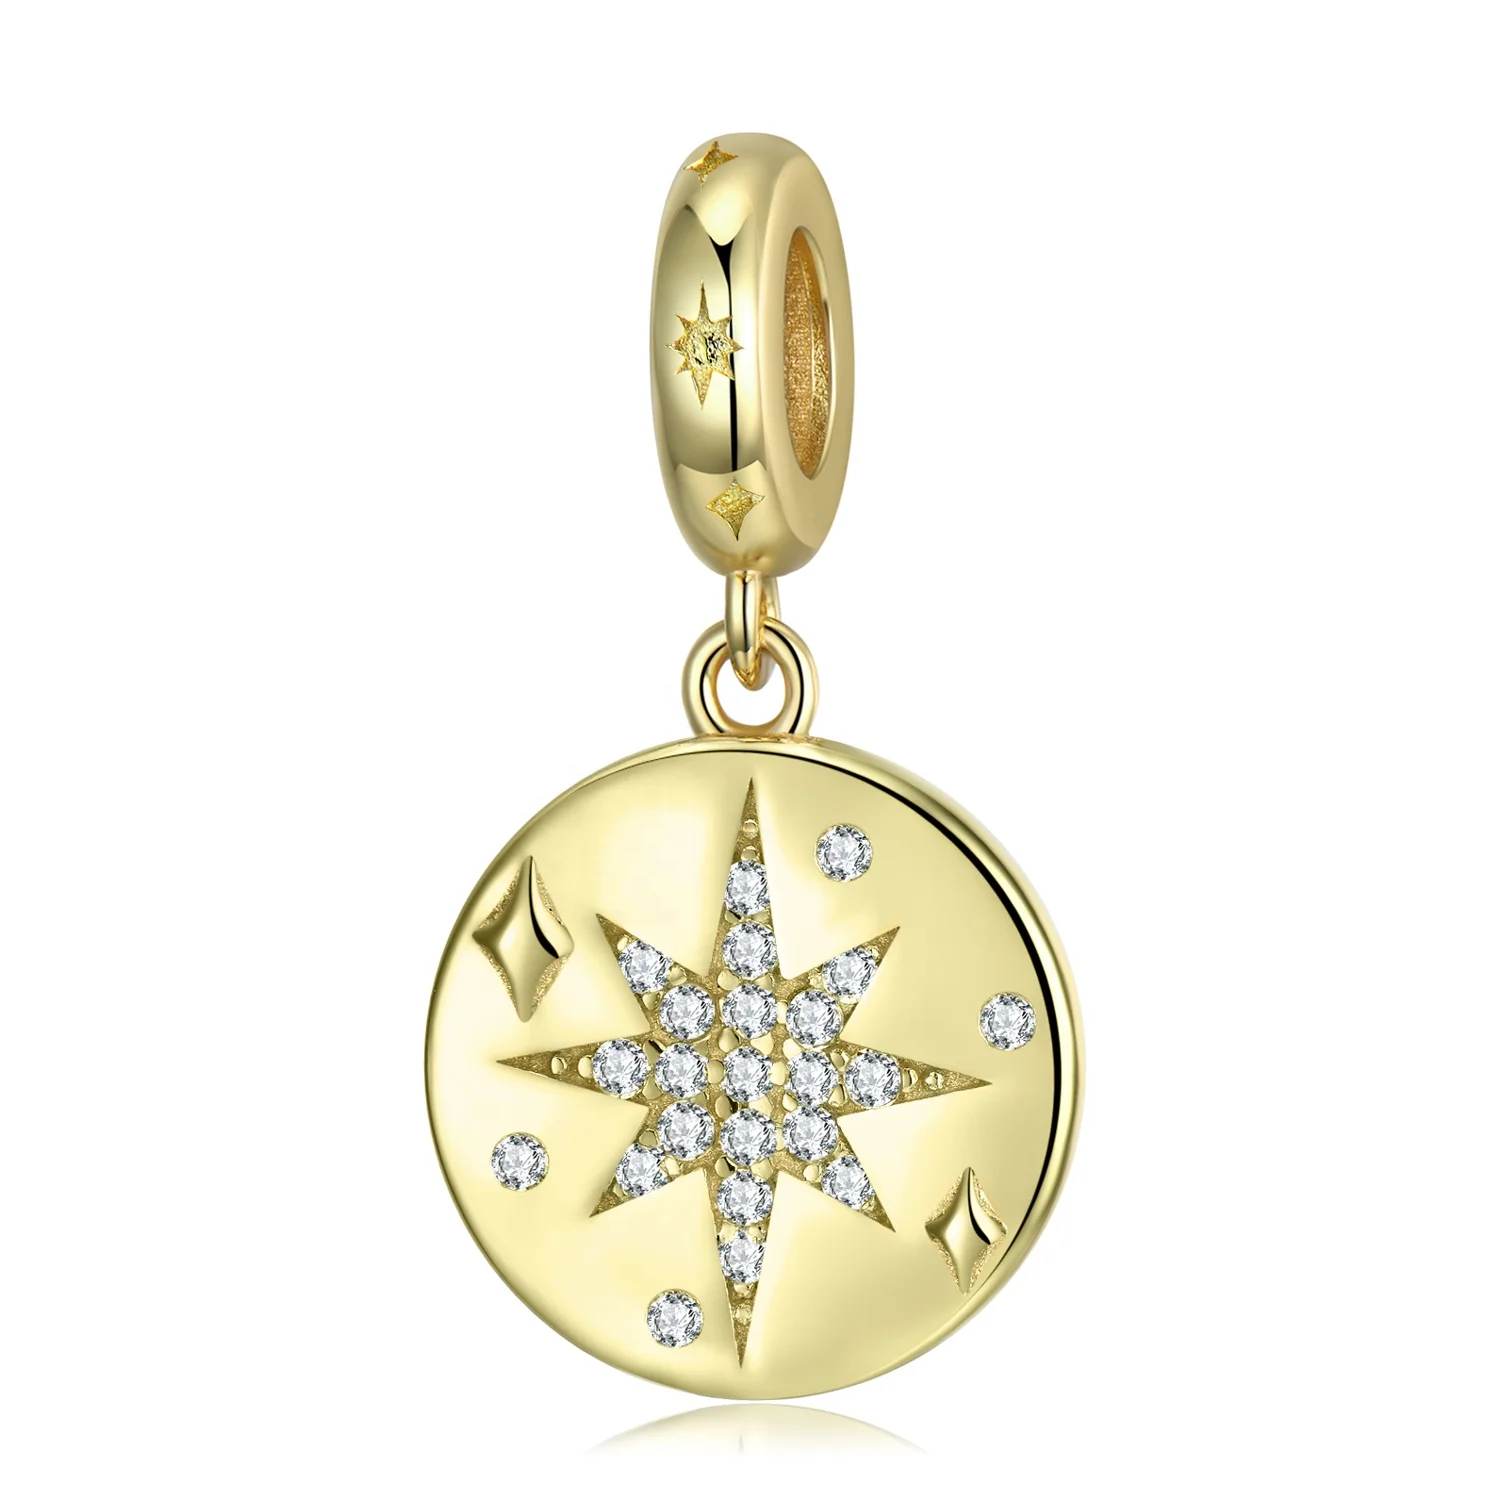 

Eight-pointed Star Pattern Gold Plated Pendant 925 Sterling Silver with CZ for Women charm bead jewelry Bracelet Wholesale